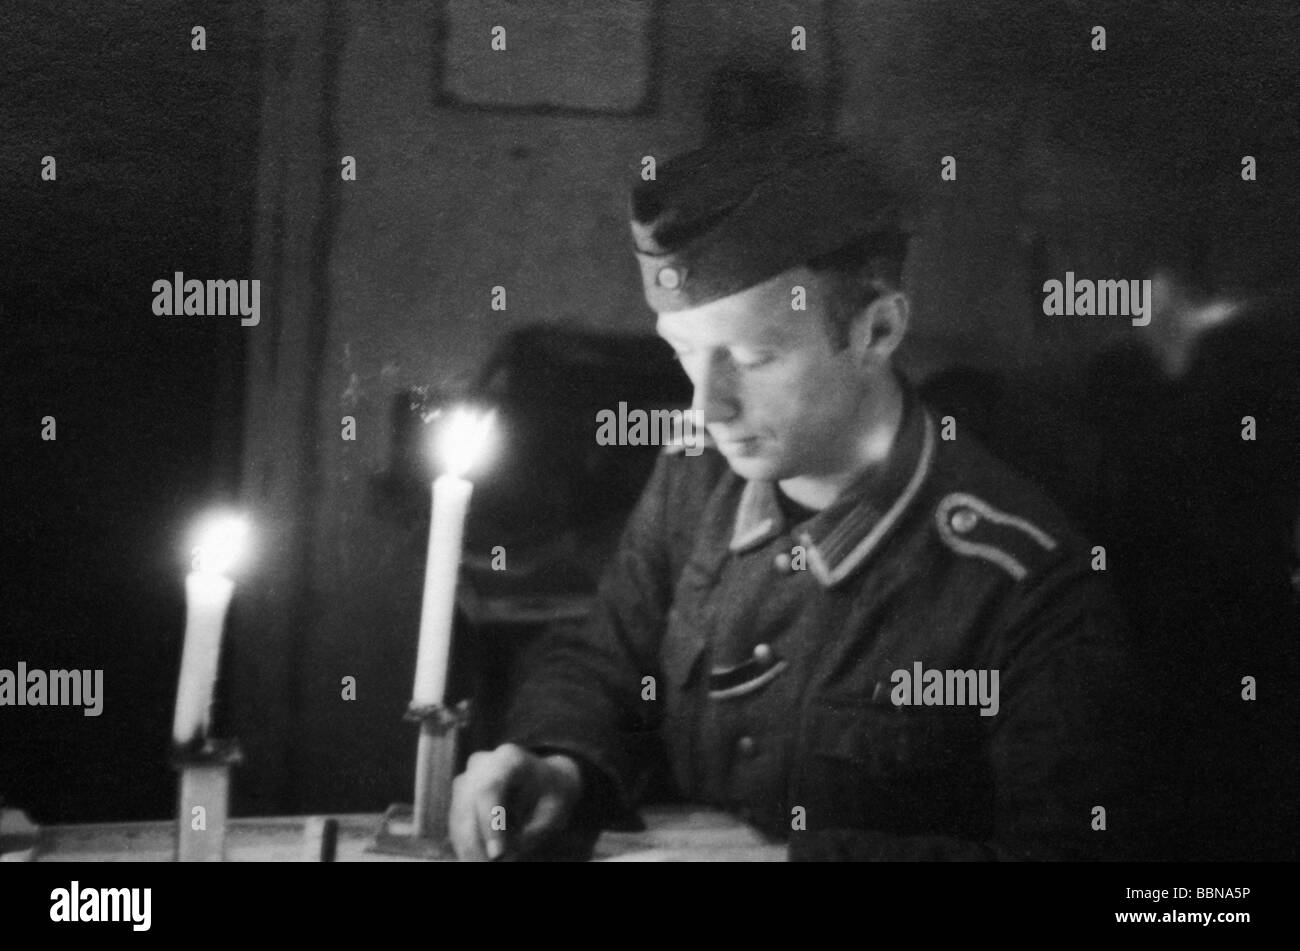 events, Second World War / WWII, Russia 1944 / 1945, Crimea, Sevastopol, German NCO writing at his quarters, April 1944, Wehrmacht, military, Third Reich, Soviet Union, USSR, Ukraine, Eastern Front, 20th century, historic, historical, Germany, soldiers, soldier, candles, candle, candlelight, candle-light, light, 1940s, people, Stock Photo